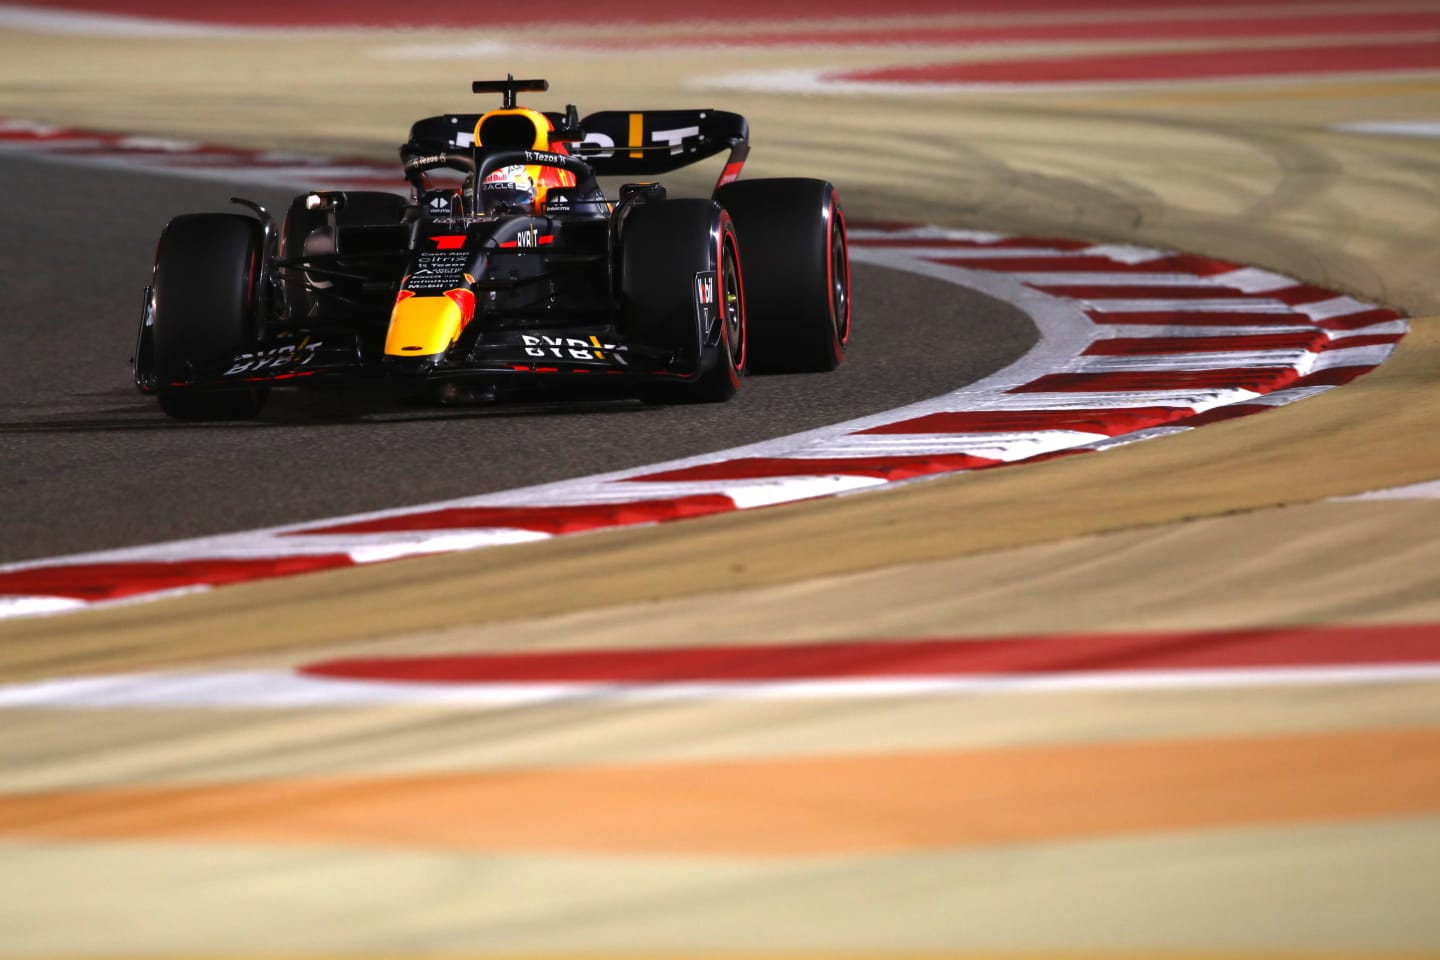 BAHRAIN, BAHRAIN - MARCH 19: Max Verstappen of the Netherlands driving the (1) Oracle Red Bull Racing RB18 on track during qualifying ahead of the F1 Grand Prix of Bahrain at Bahrain International Circuit on March 19, 2022 in Bahrain, Bahrain. (Photo by Joe Portlock - Formula 1/Formula 1 via Getty Images)